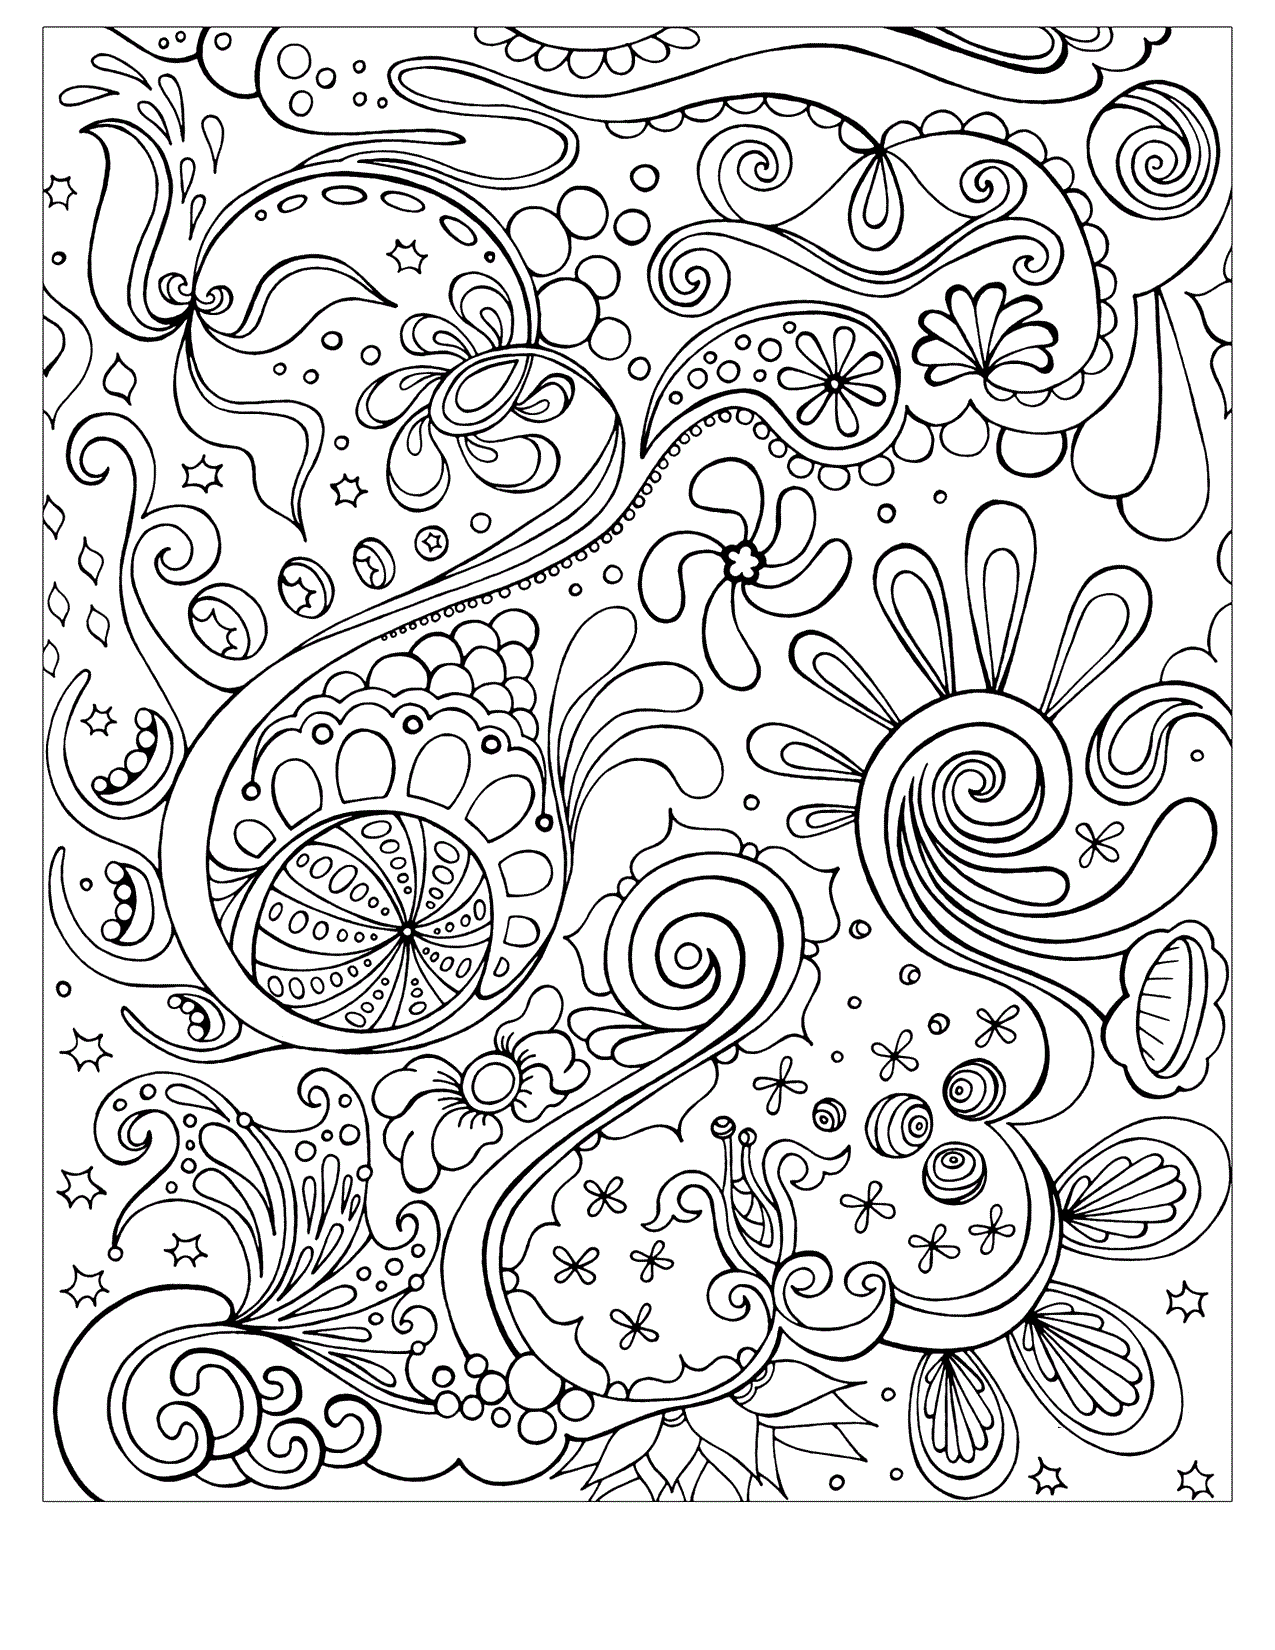 134 Animal Printable Coloring Pages For Kids with Animal character